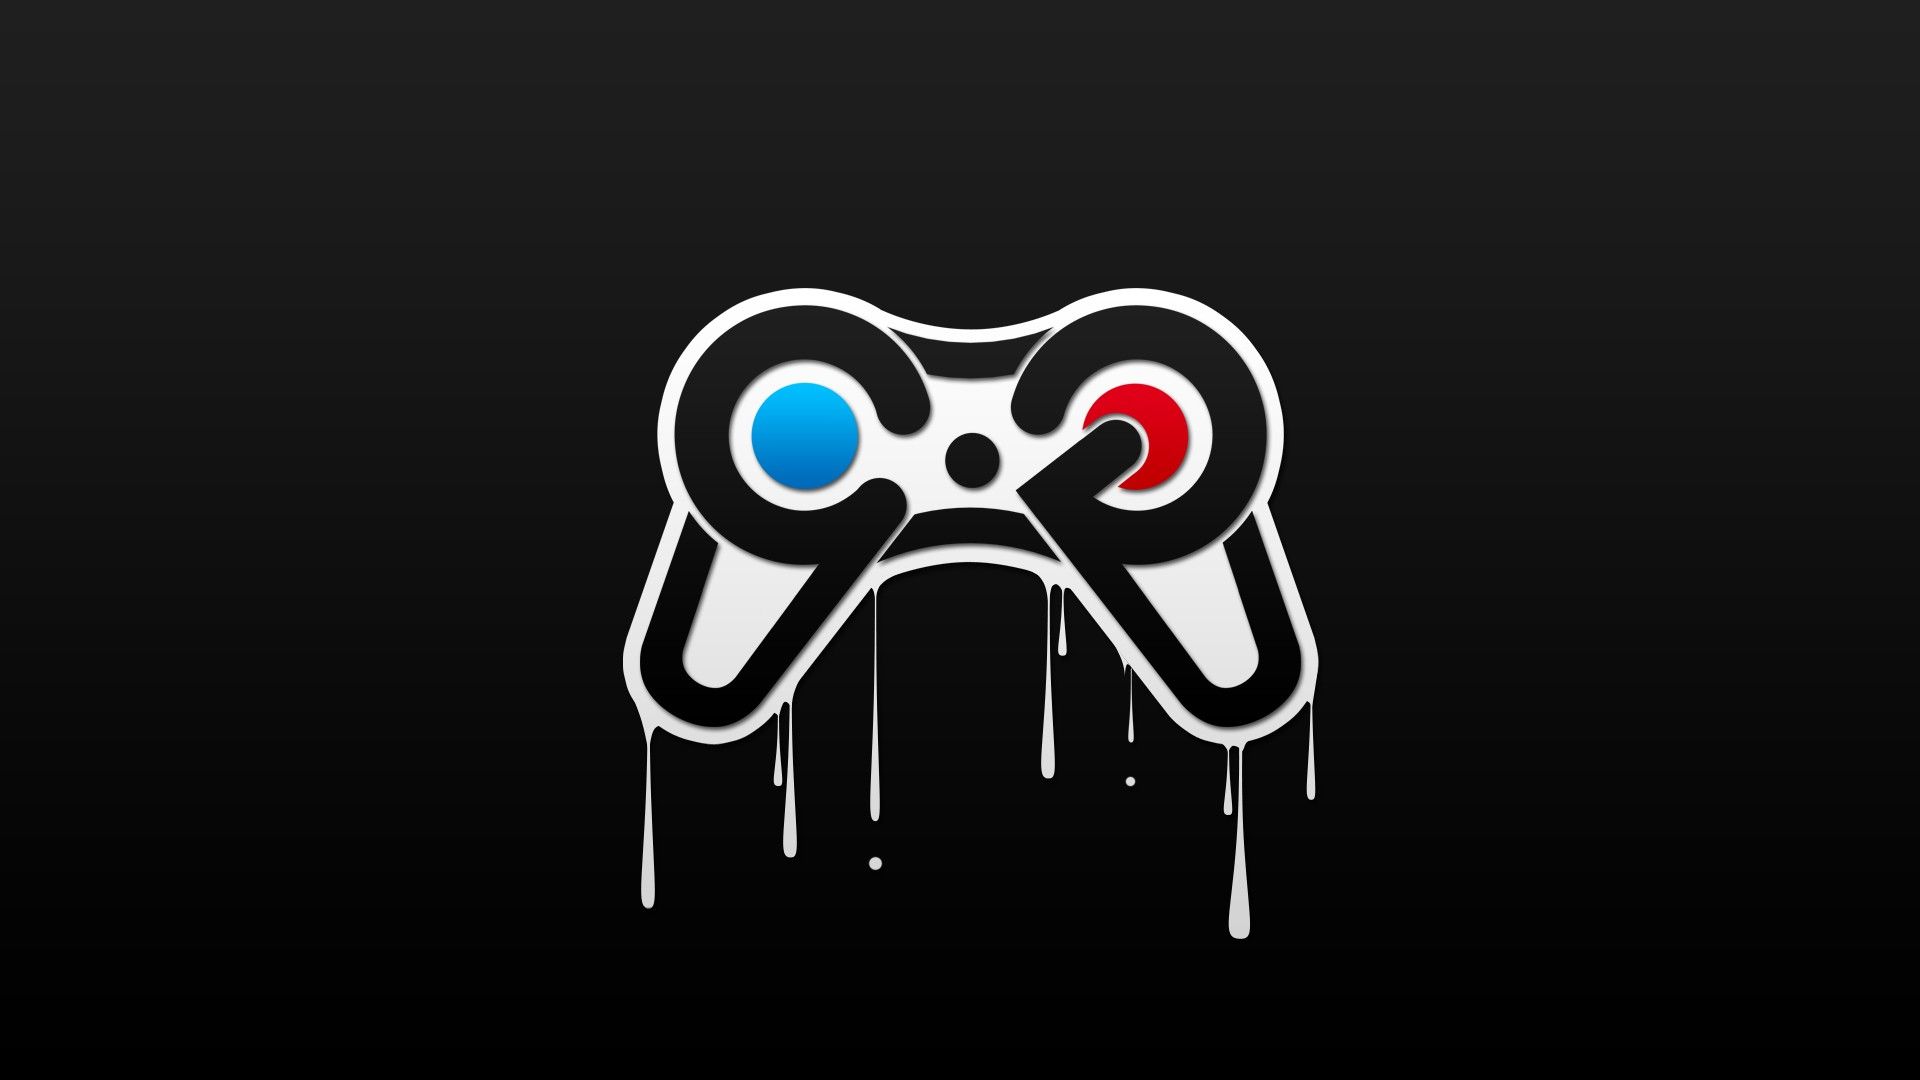 Video Game Controller Wallpaper For Android Free Download > SubWallpaper